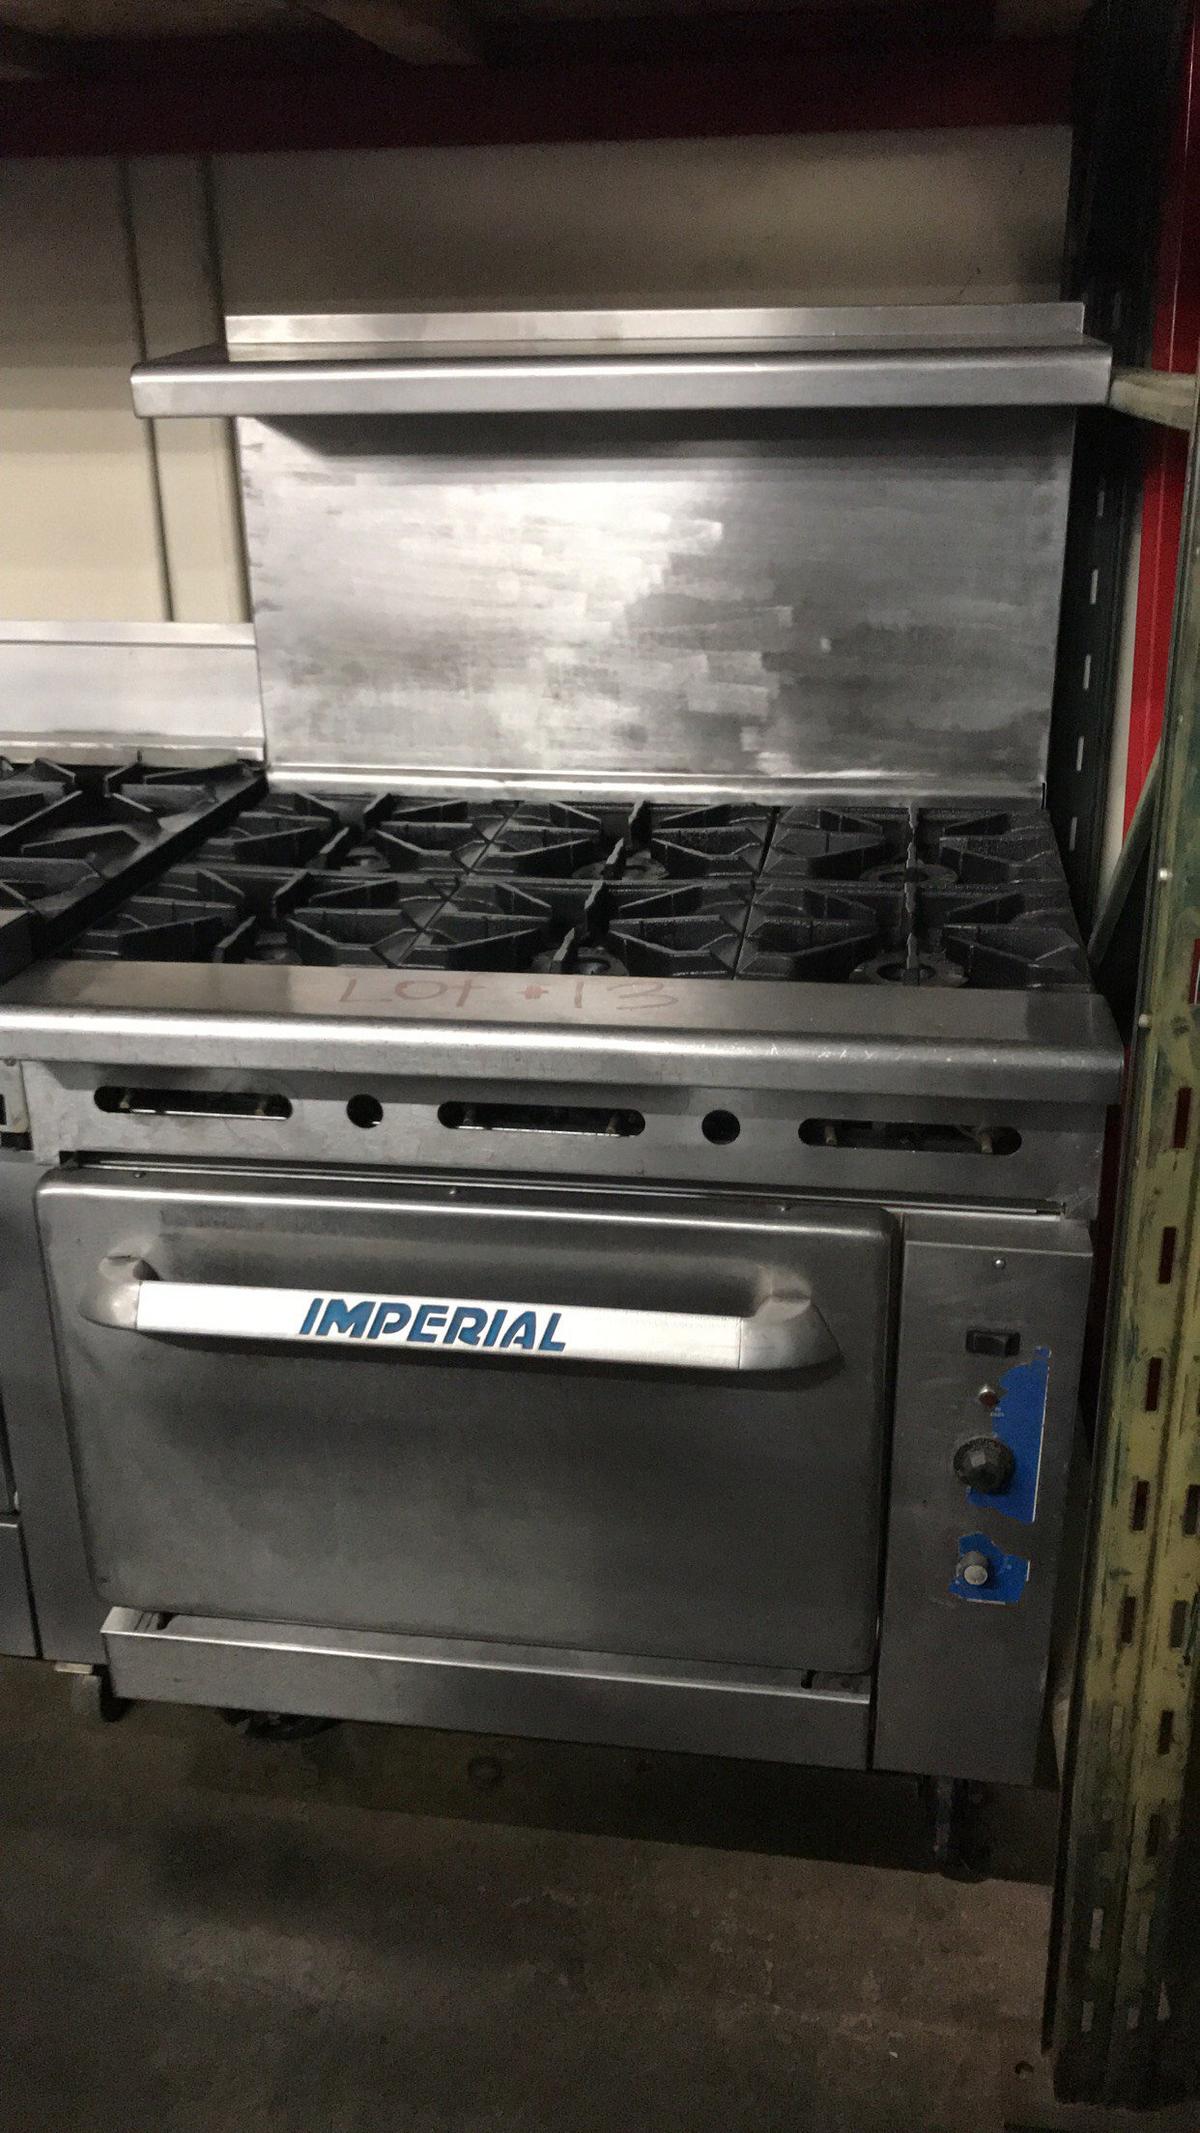 IMPERIAL 6 BURNER STOVE W/ CONVECTION OVEN